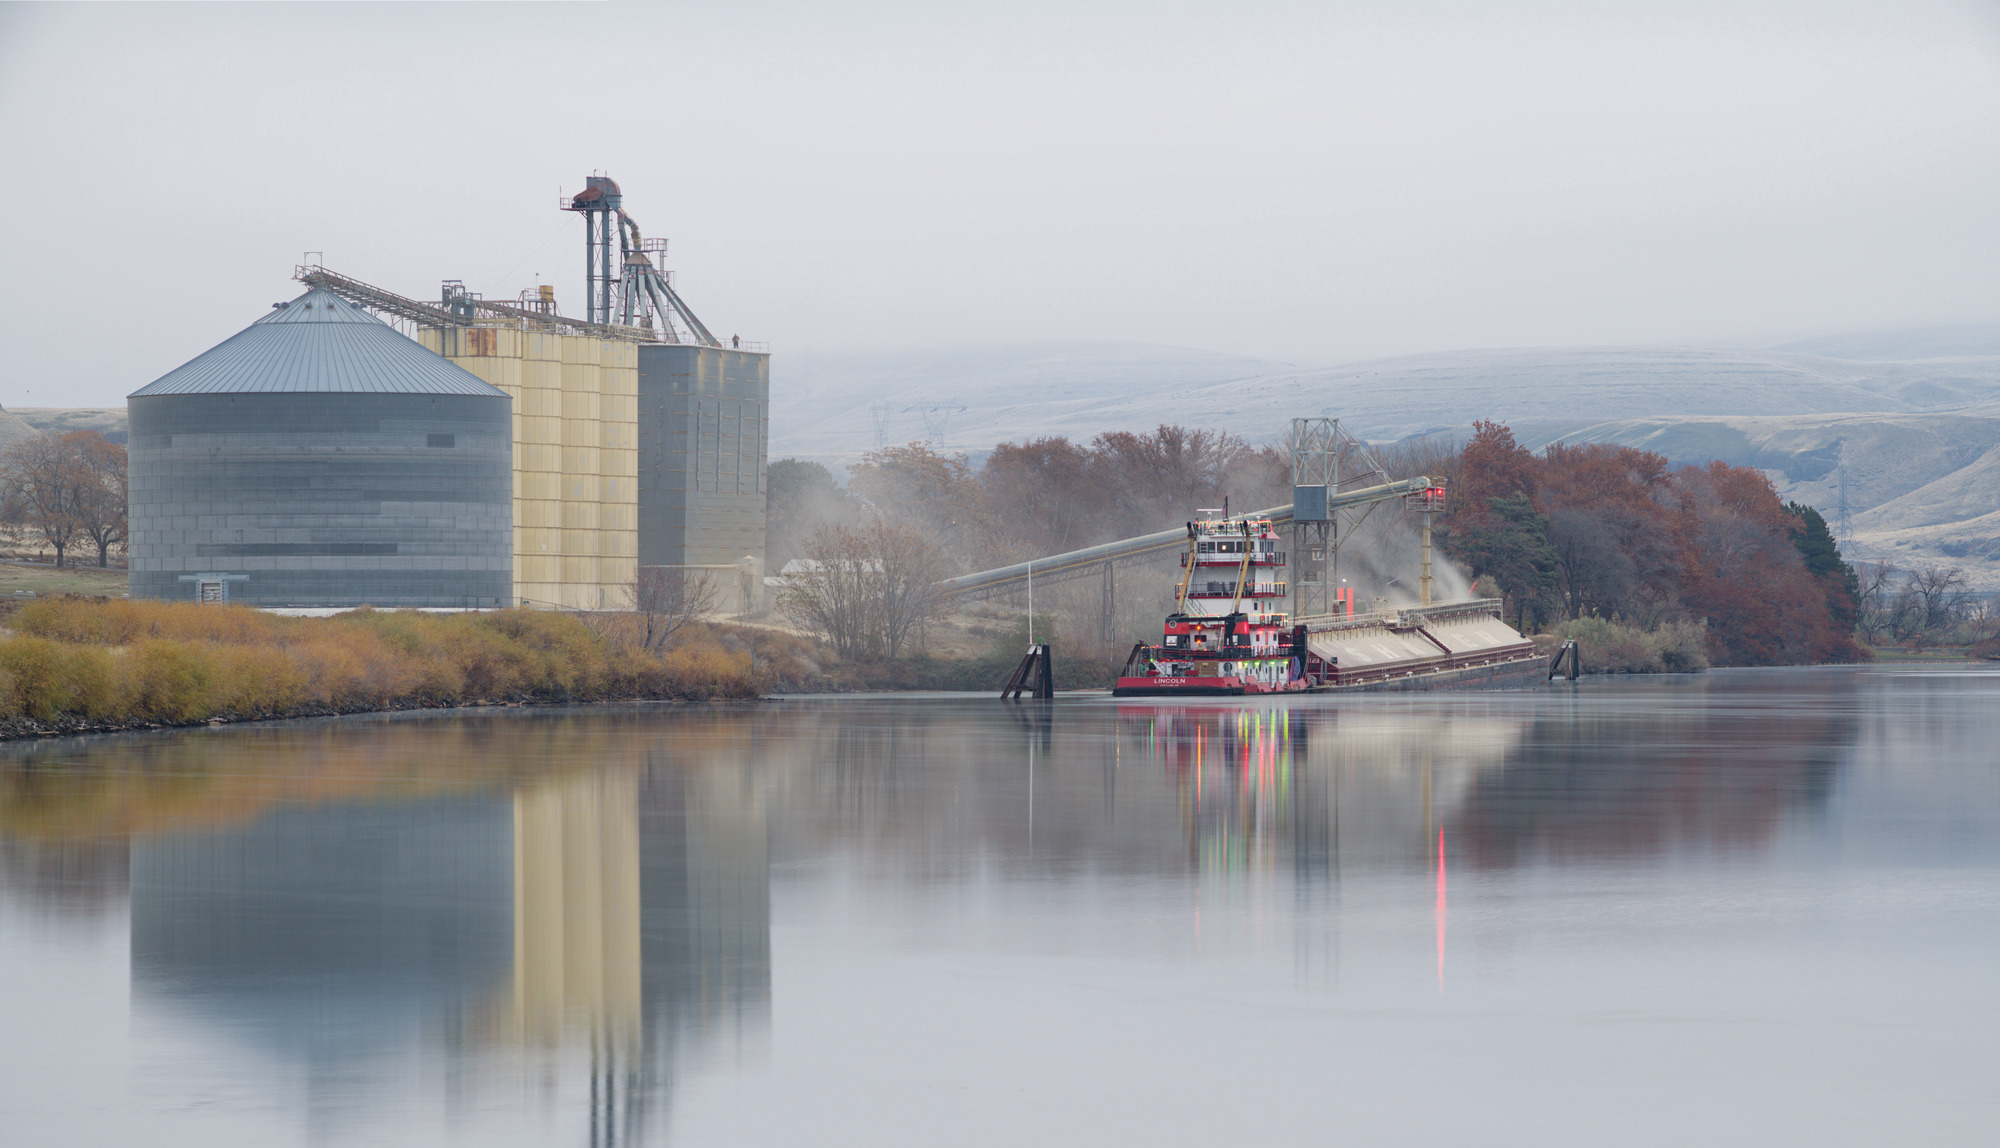 With Lewiston, Idaho, as the world’s most inland seaport, barges load wheat for export at various elevators along the lower Snake River.